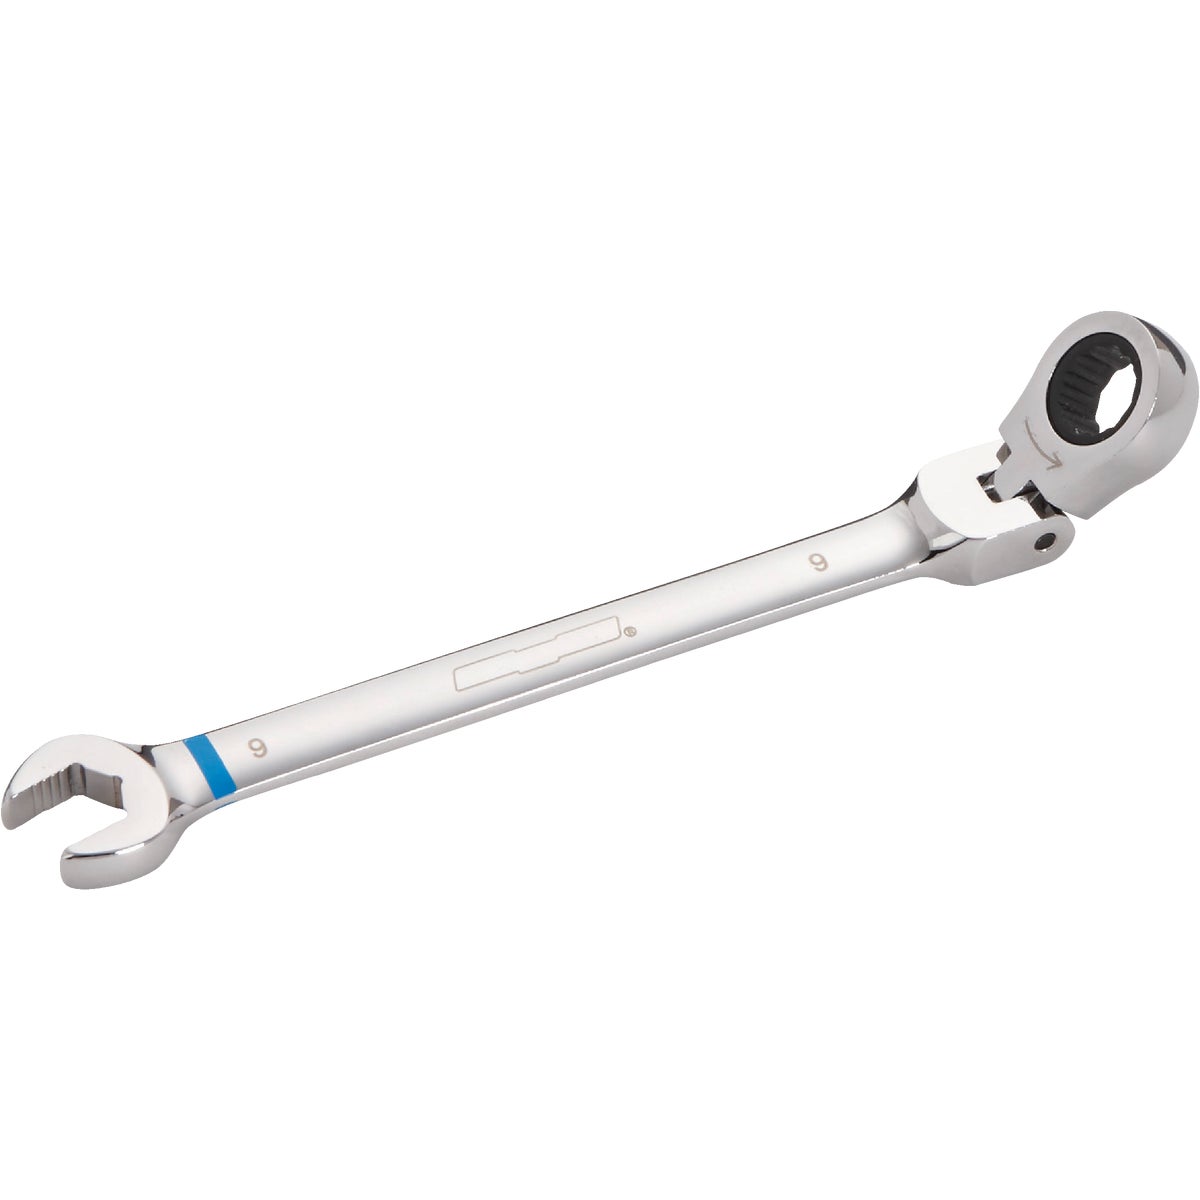 Channellock Metric 9 mm 12-Point Ratcheting Flex-Head Wrench